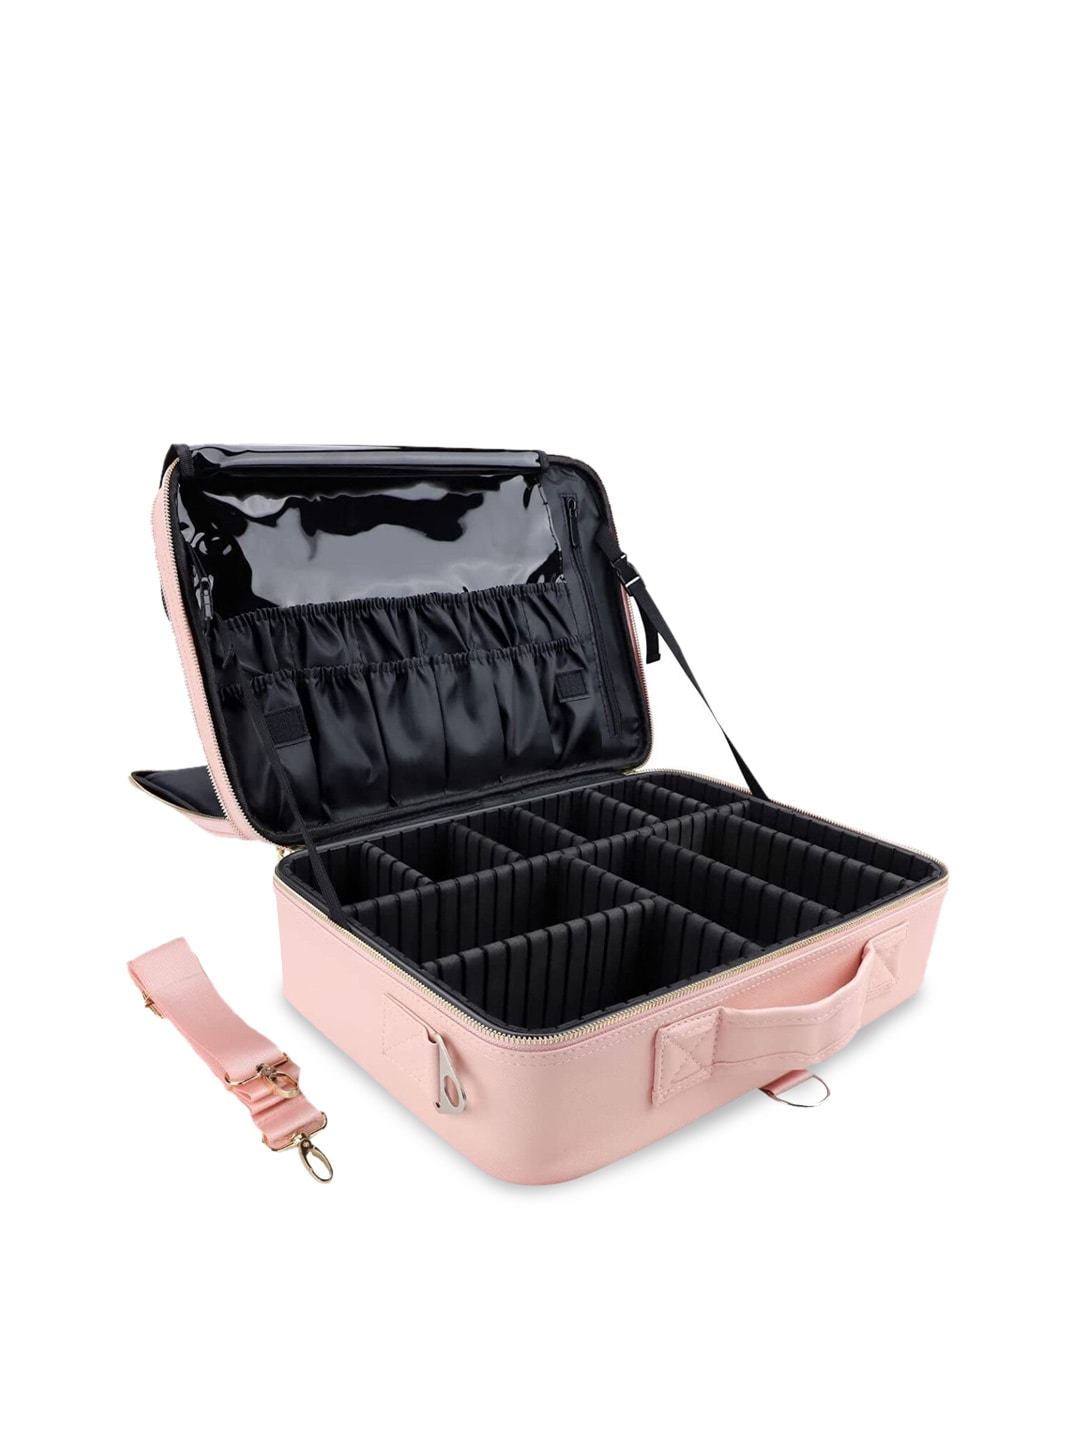 LACOPINE Solid 18 Inch 2 Layer Makeup Organizer - Baby Pink Price in India